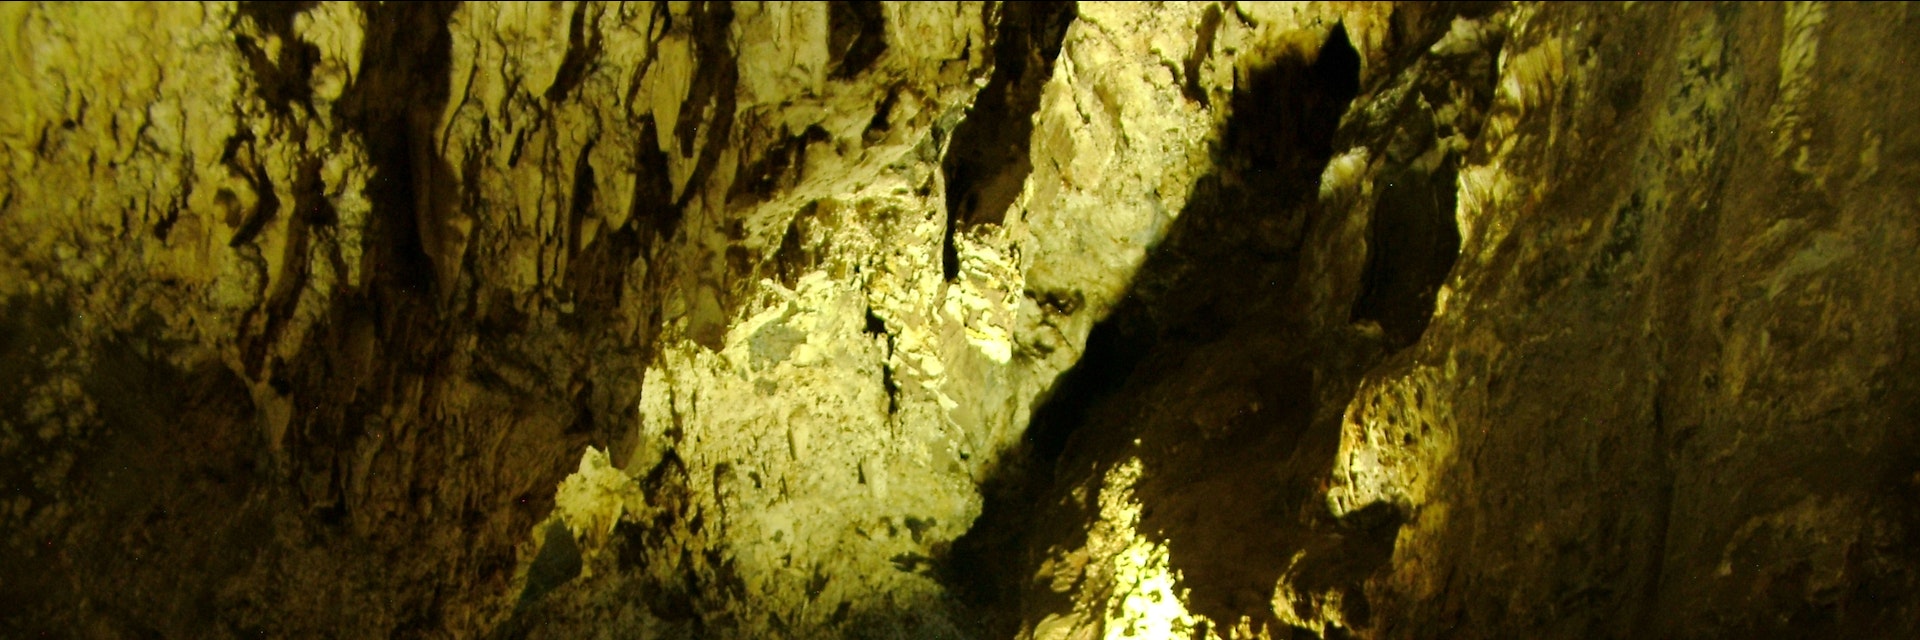 Sterkfontein Caves in South Africa.